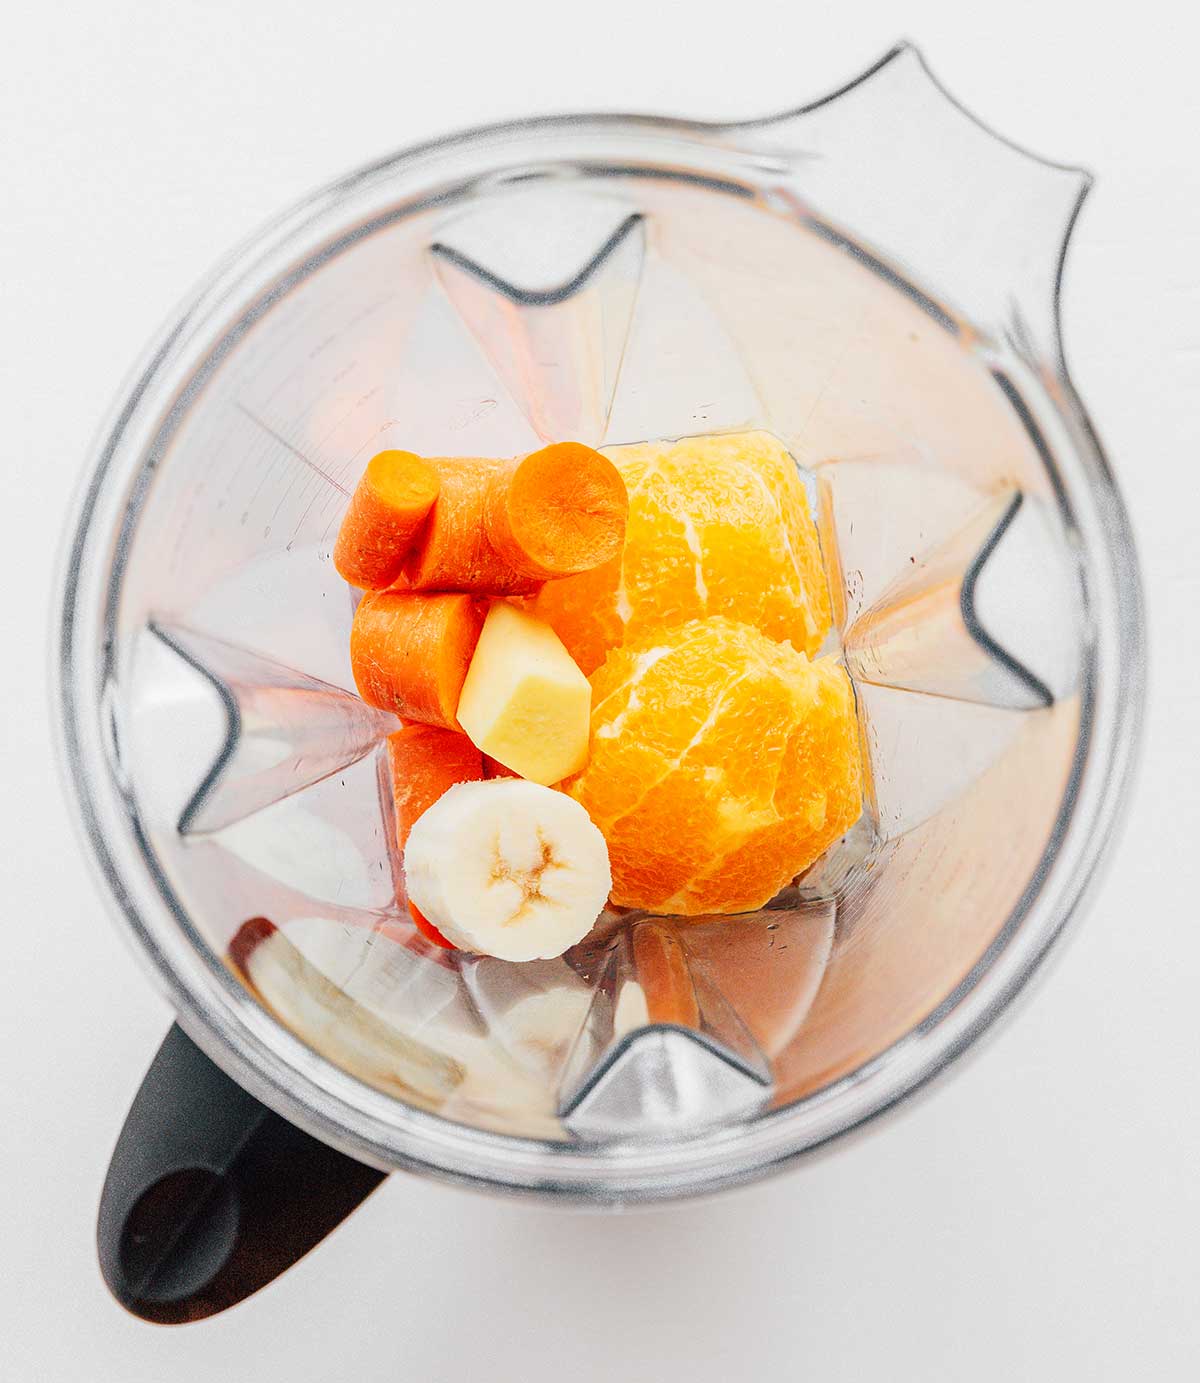 A blender filled with sliced banana, sliced carrots, chopped pineapple, and 2 halves of an orange